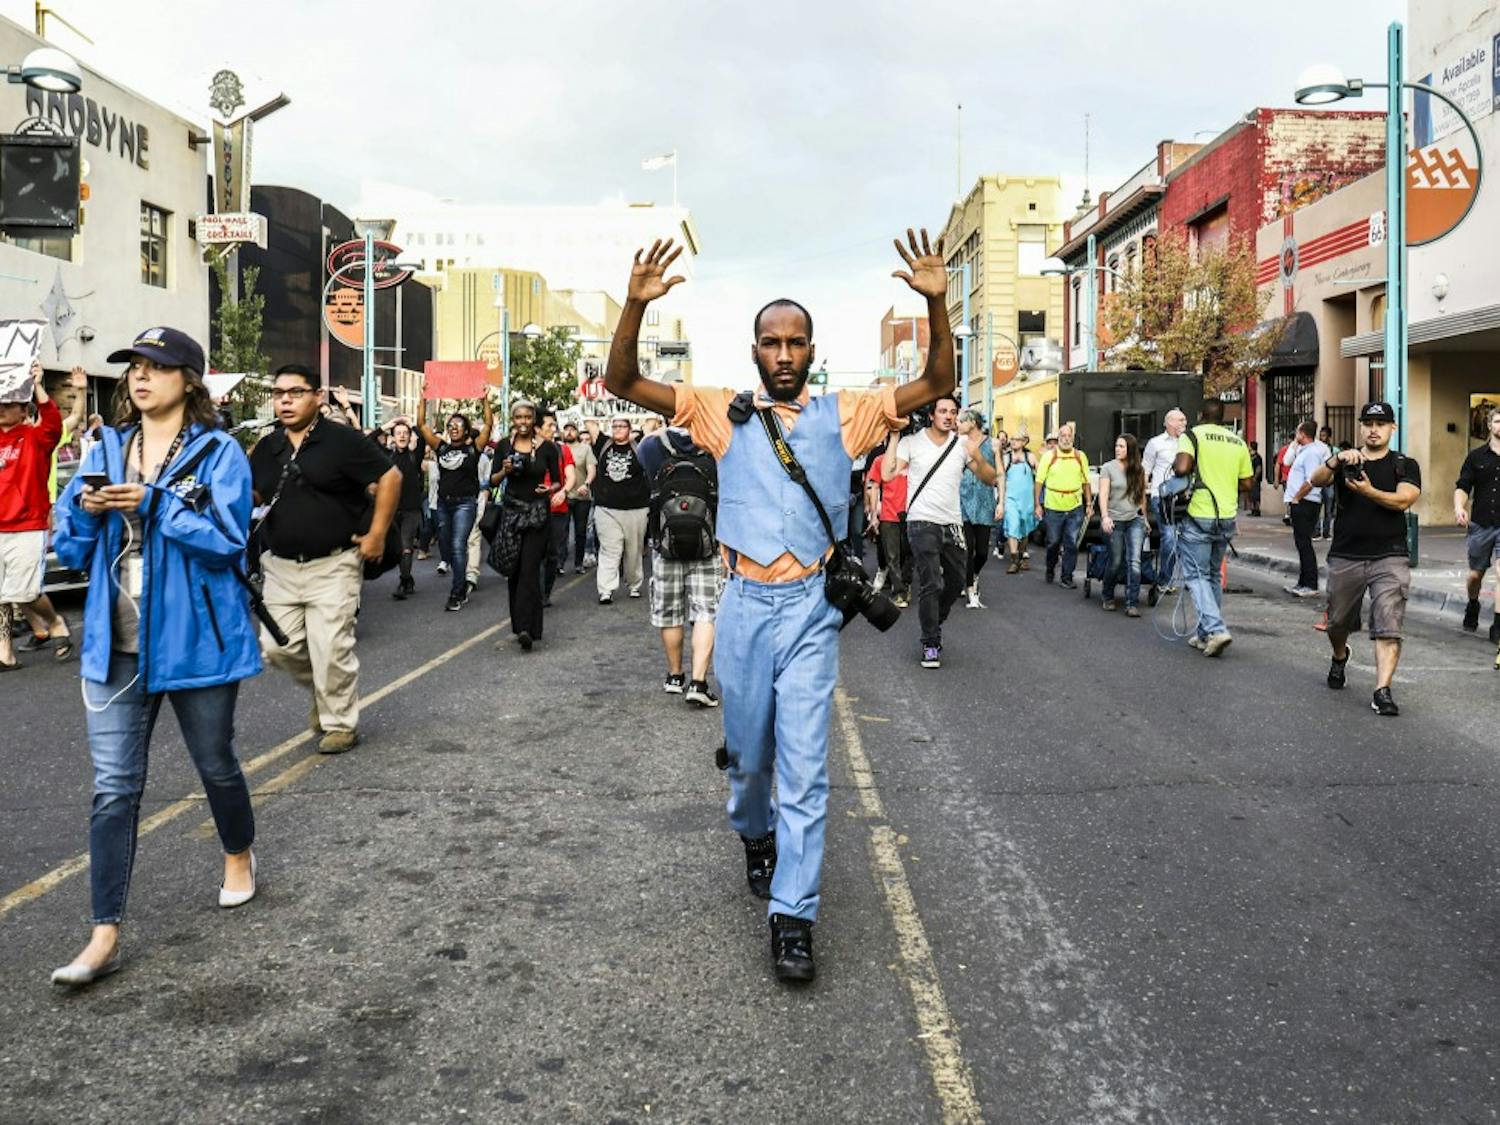 Arthur Bell raises his arms as protesters chant “hands up don’t shoot” during the Black Lives Matter March on Friday, Sept. 22, 2017. Participants marched through Downtown before stopping at the roundabout on 8th Street.&nbsp;